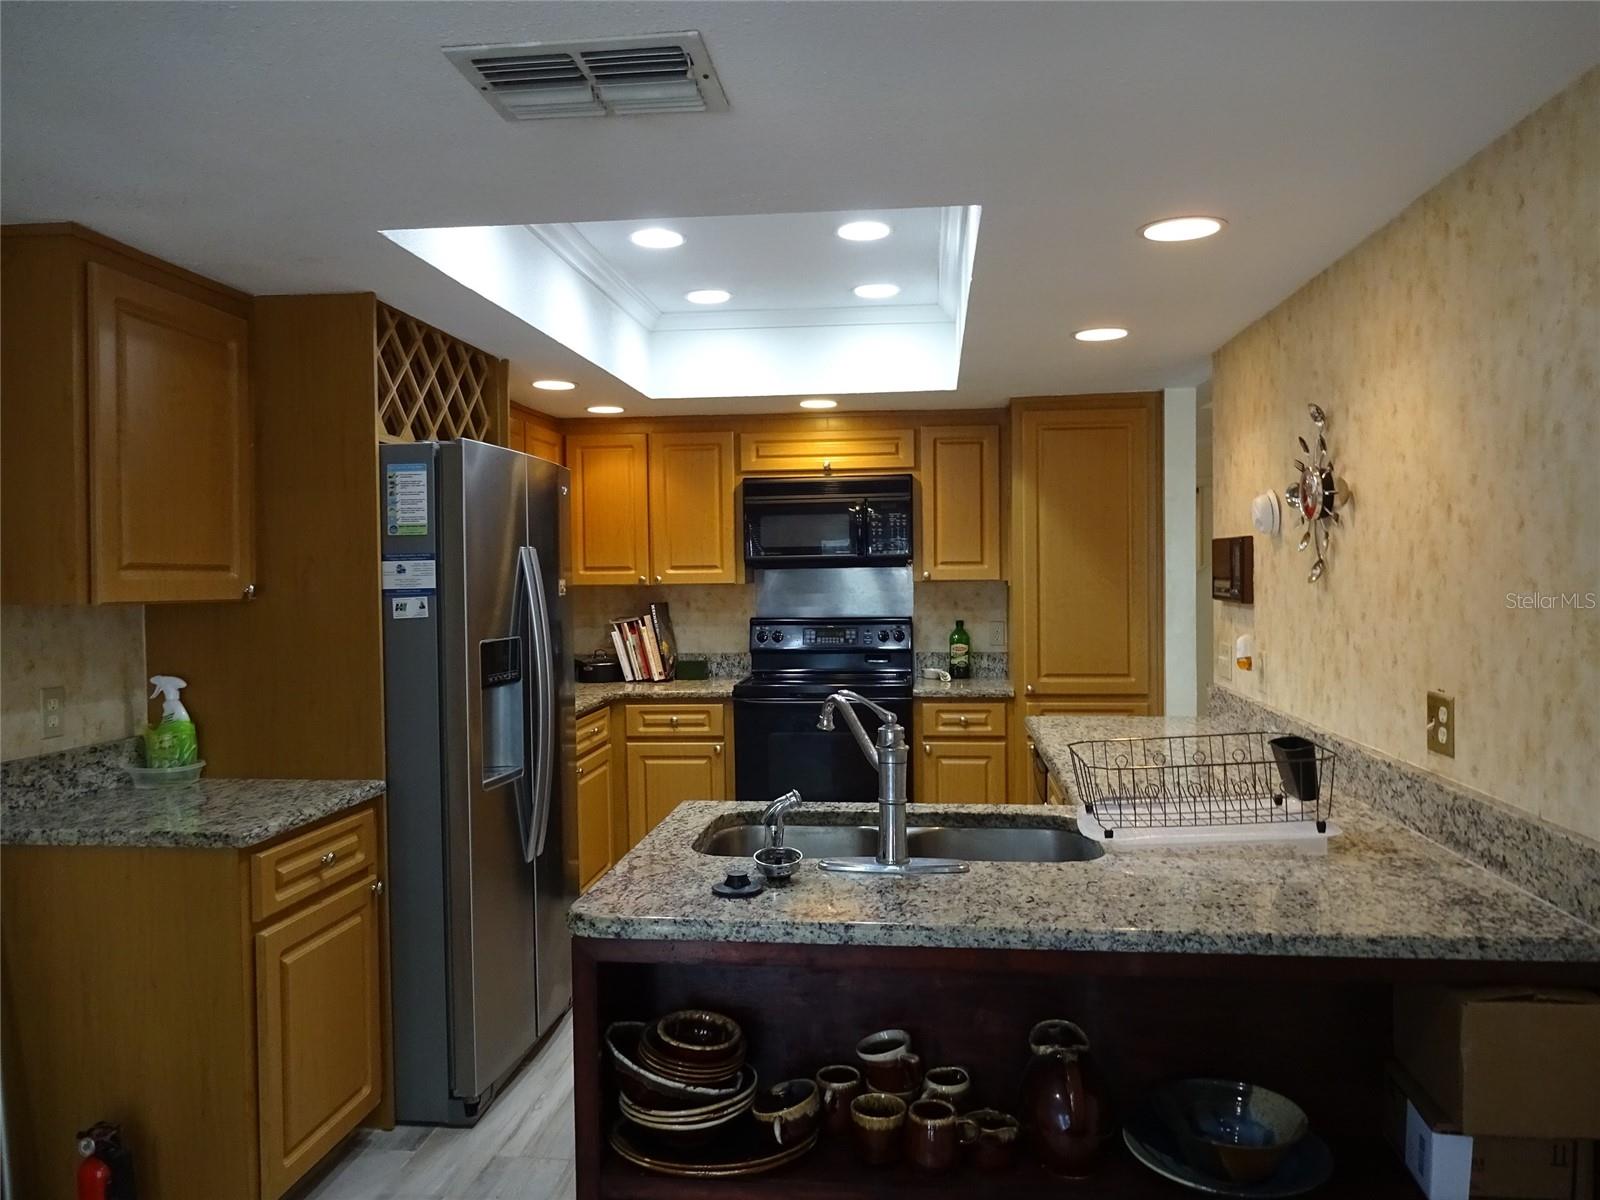 kitchen with recessed lighting